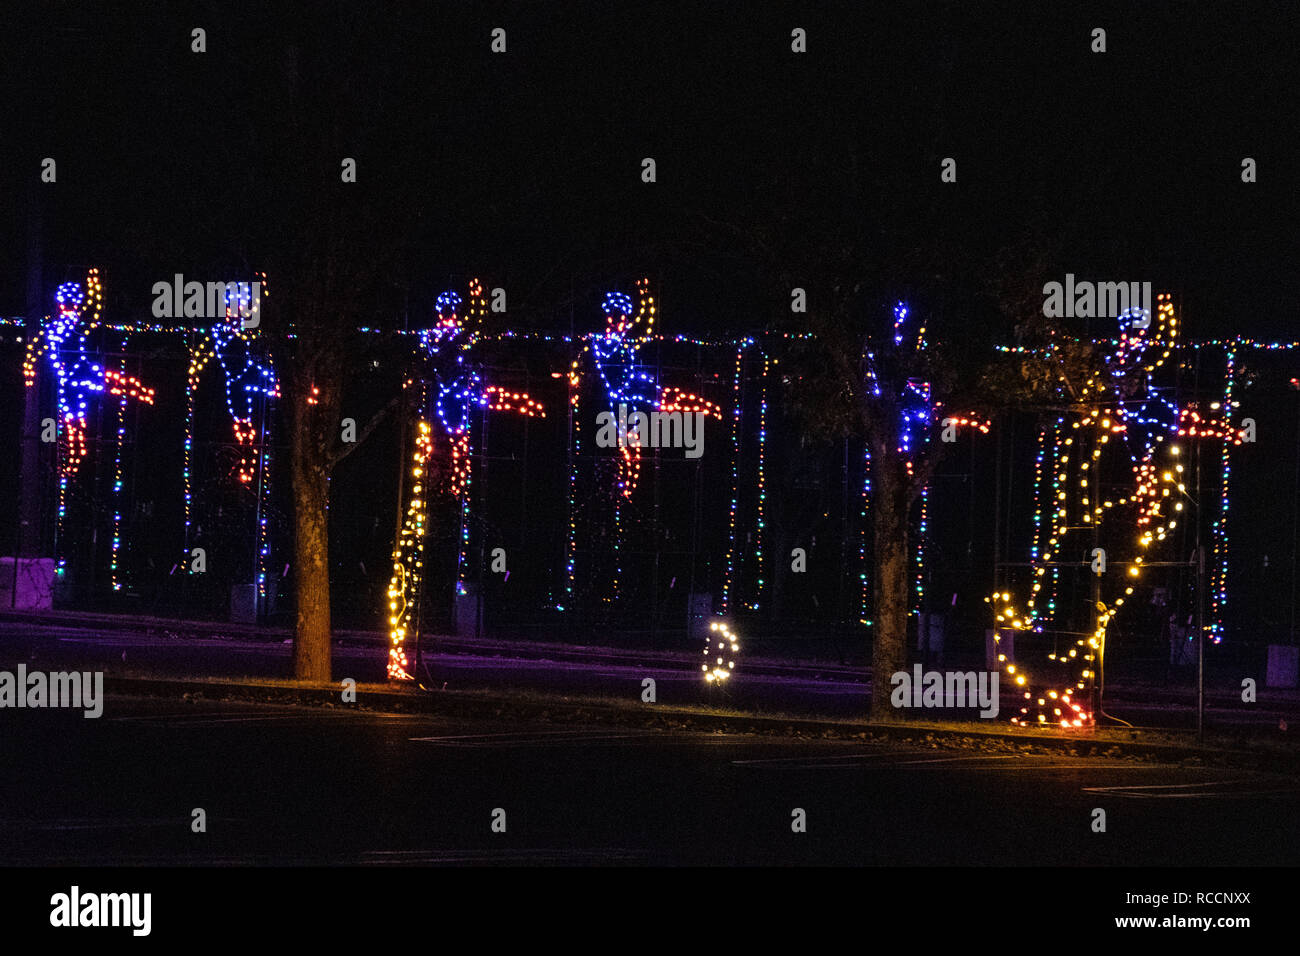 Holmdel Township, United States - November 20 2018: PNC Bank Arts Center Christmas  Lights showing Lords a leaping, off the Garden State Parkway Stock Photo -  Alamy